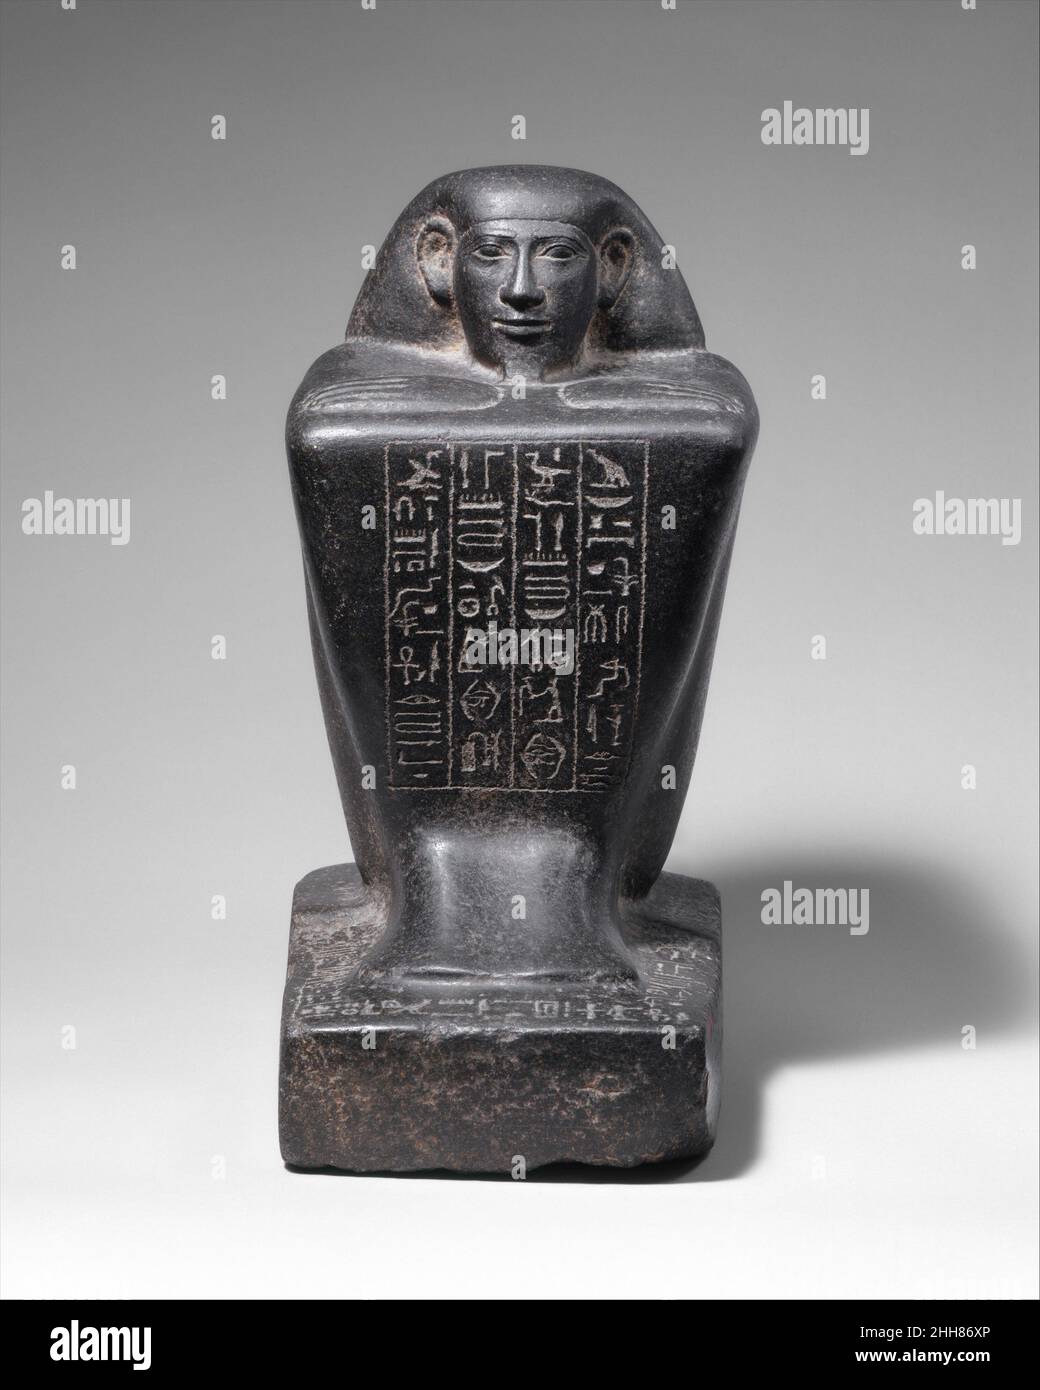 Block Statue of a Prophet of Montu and Scribe Djedkhonsuefankh, son of Khonsumes and Taat 690–610 B.C. Late Period, Kushite–Saite In the late 25th dynasty and early 26th Dynasty the austere beauty of the block statue form, here particularly enhanced by the hard gleam of dark surfaces, was greatly appreciated. The form puts a strong emphasis on the face and complements the often stern countenances favored at the time.The front of the statue gives the names, titles and parentage of Djedkhonsuiuefankh, son of Khonsumes and Taat. Djedkhonsuiuefankh can be linked to a multigeneration illustrious fa Stock Photo